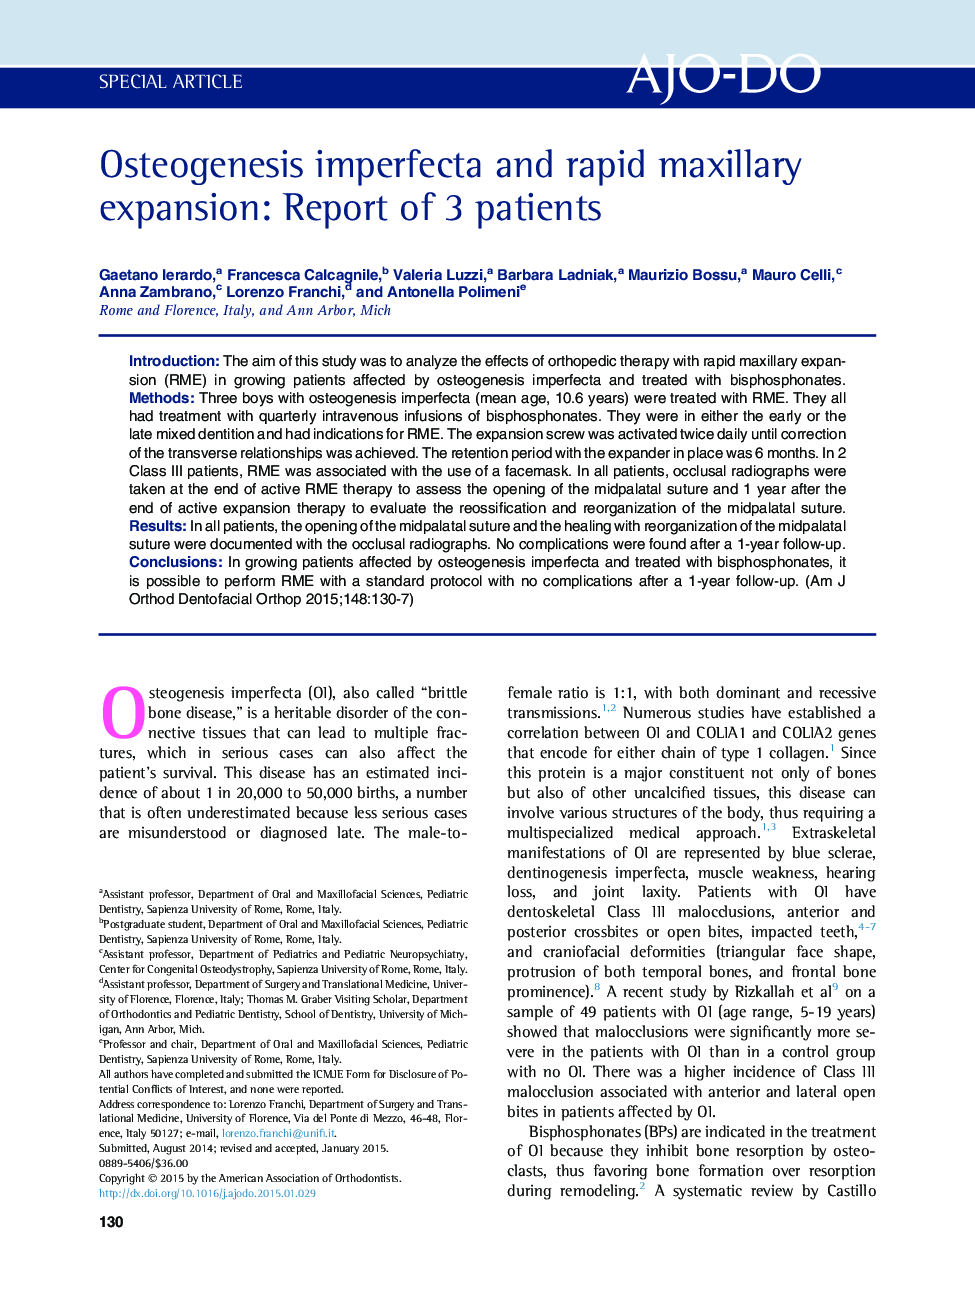 Osteogenesis imperfecta and rapid maxillary expansion: Report of 3 patients 